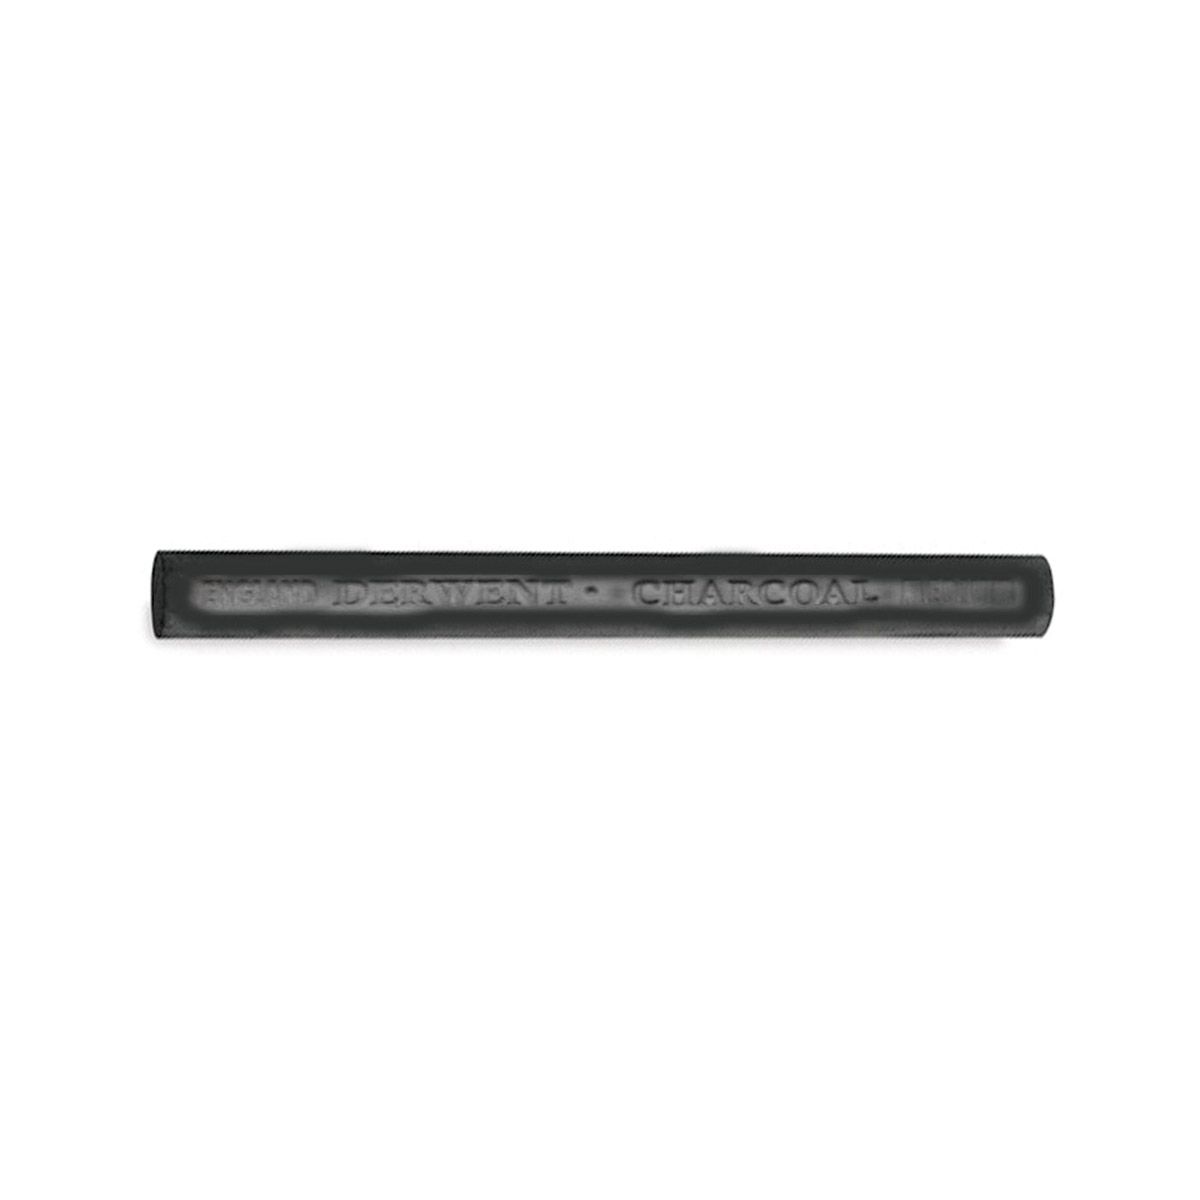 Compressed Charcoal Round Stick, Light